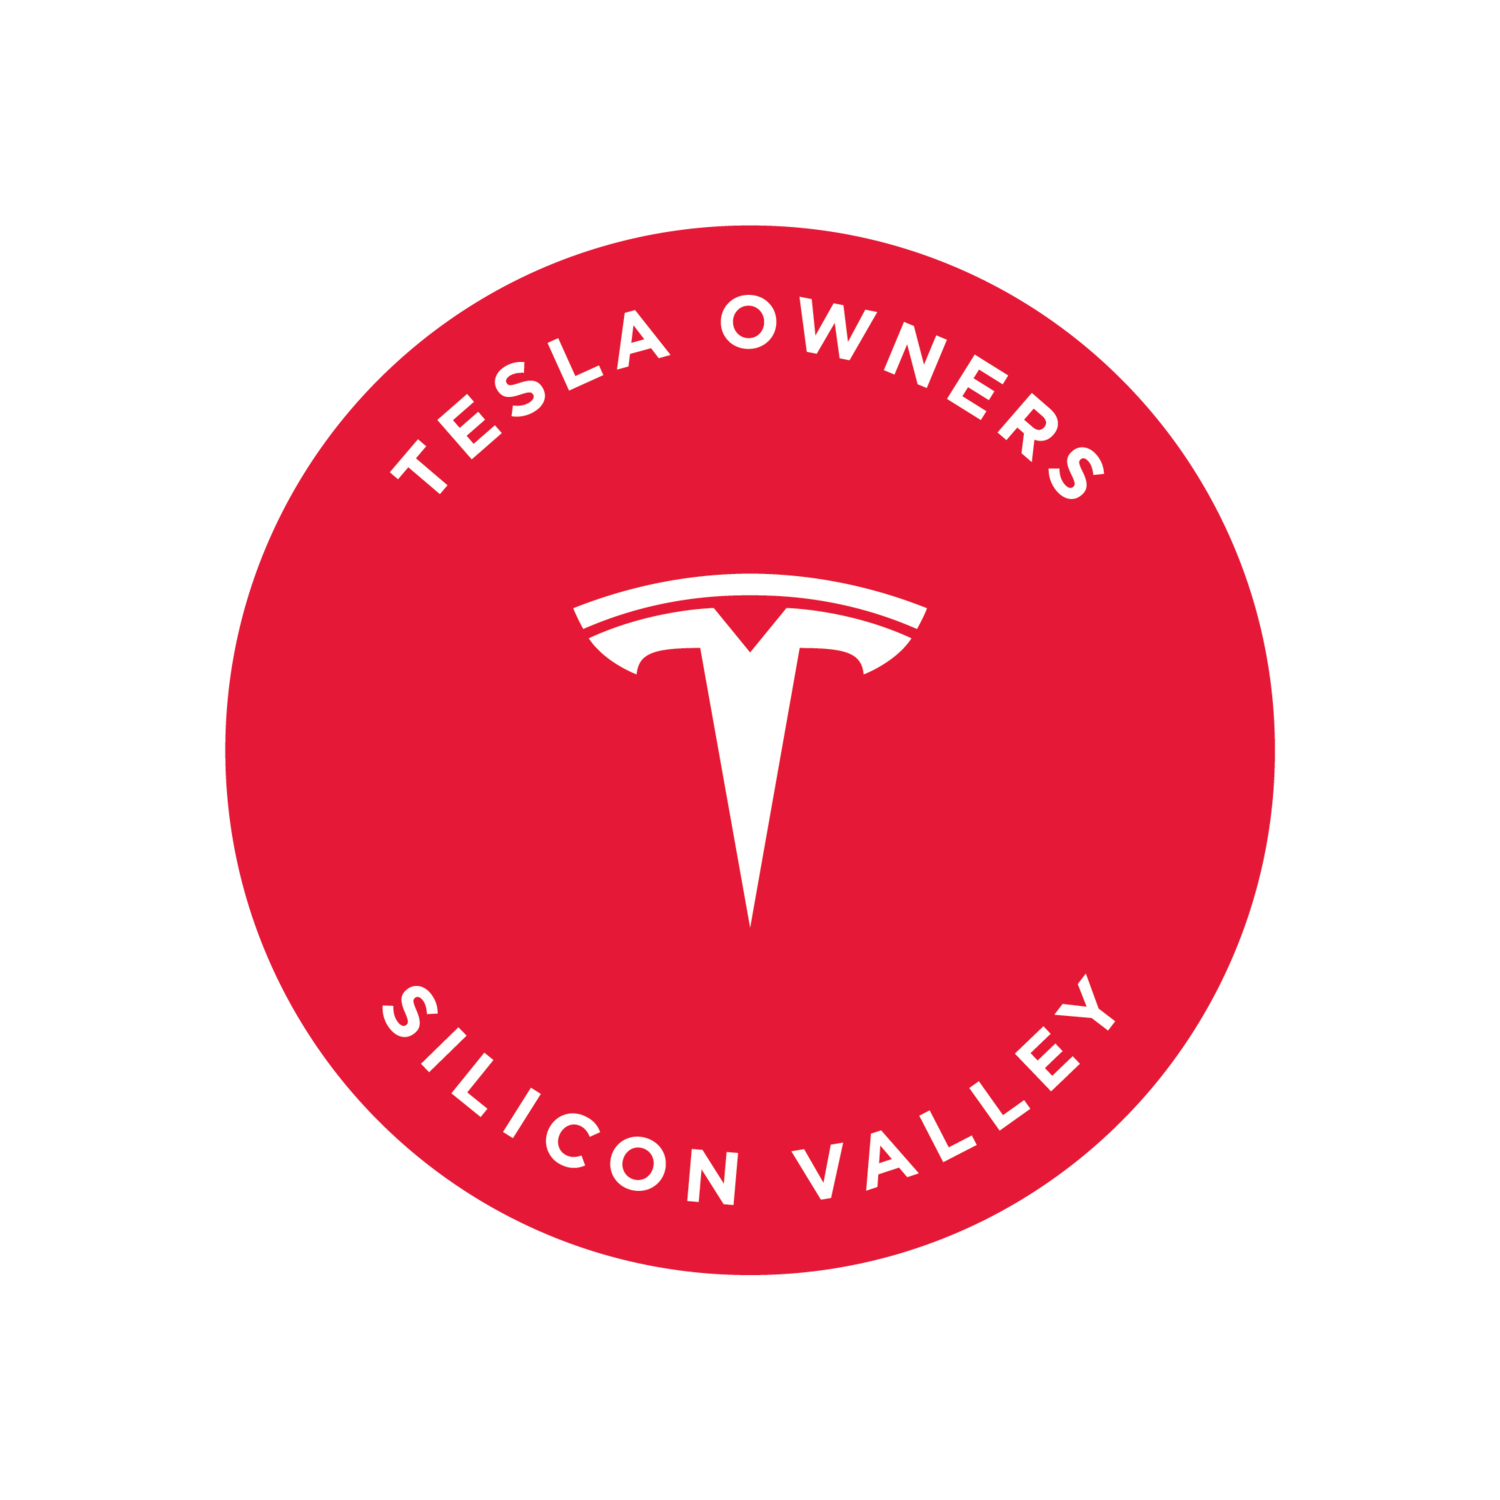 Tesla Owners of Silicon Valley